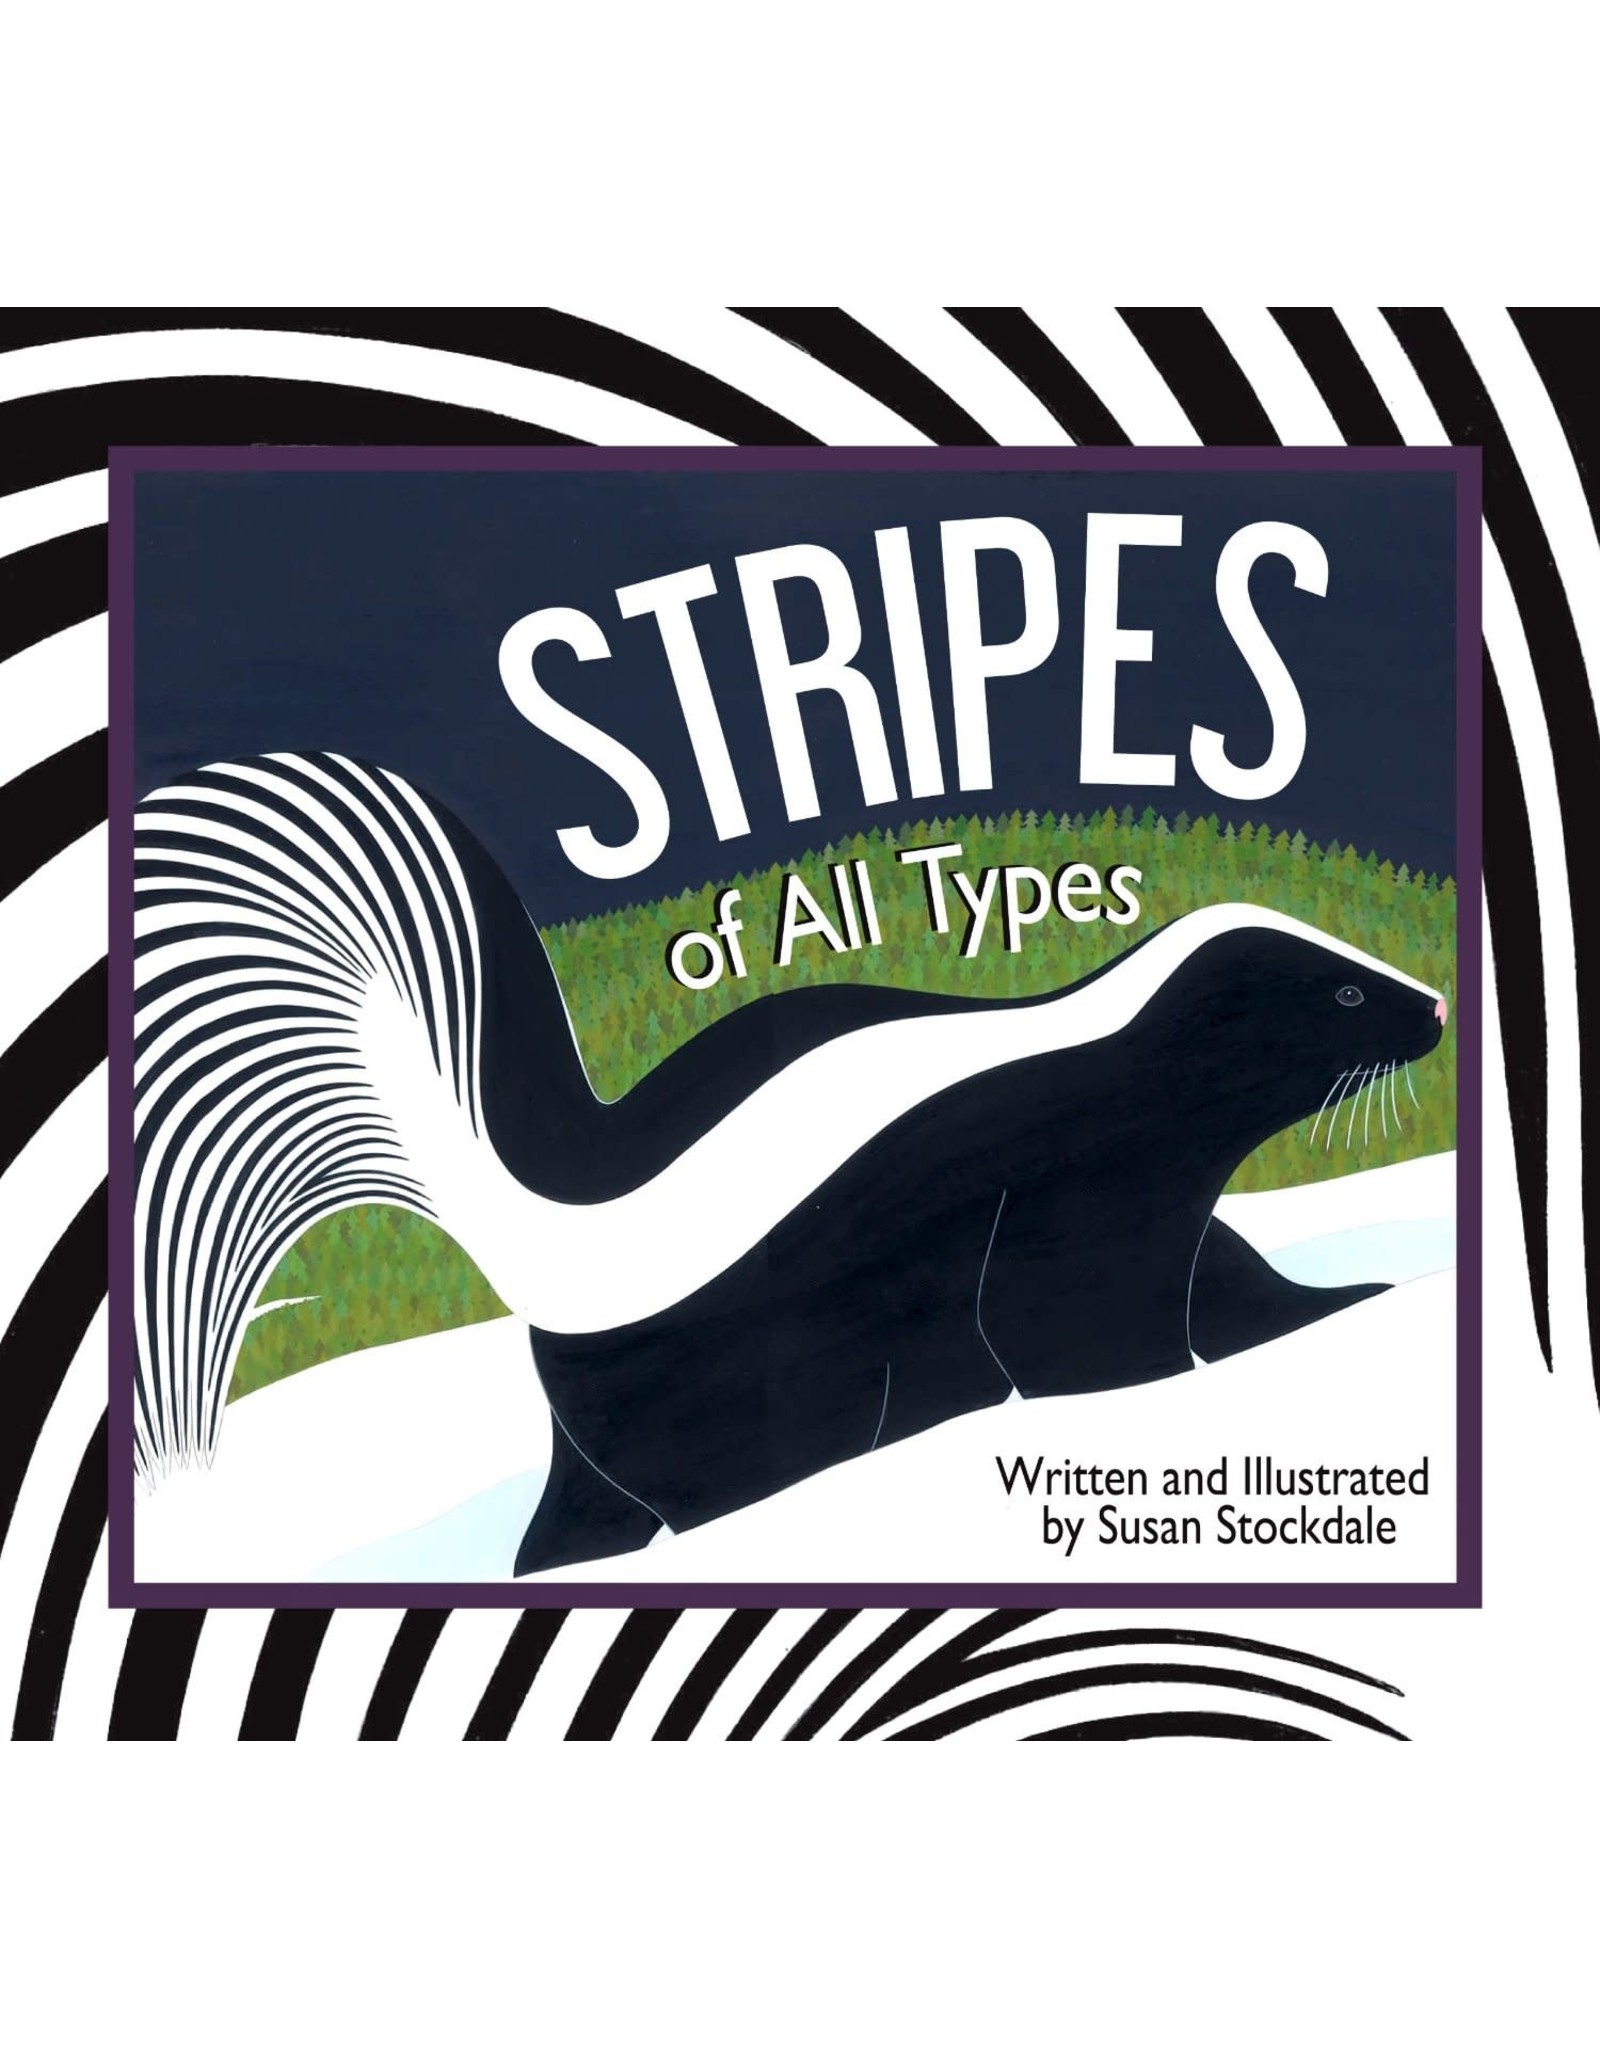 Stripes of All Types - Susan Stockdale